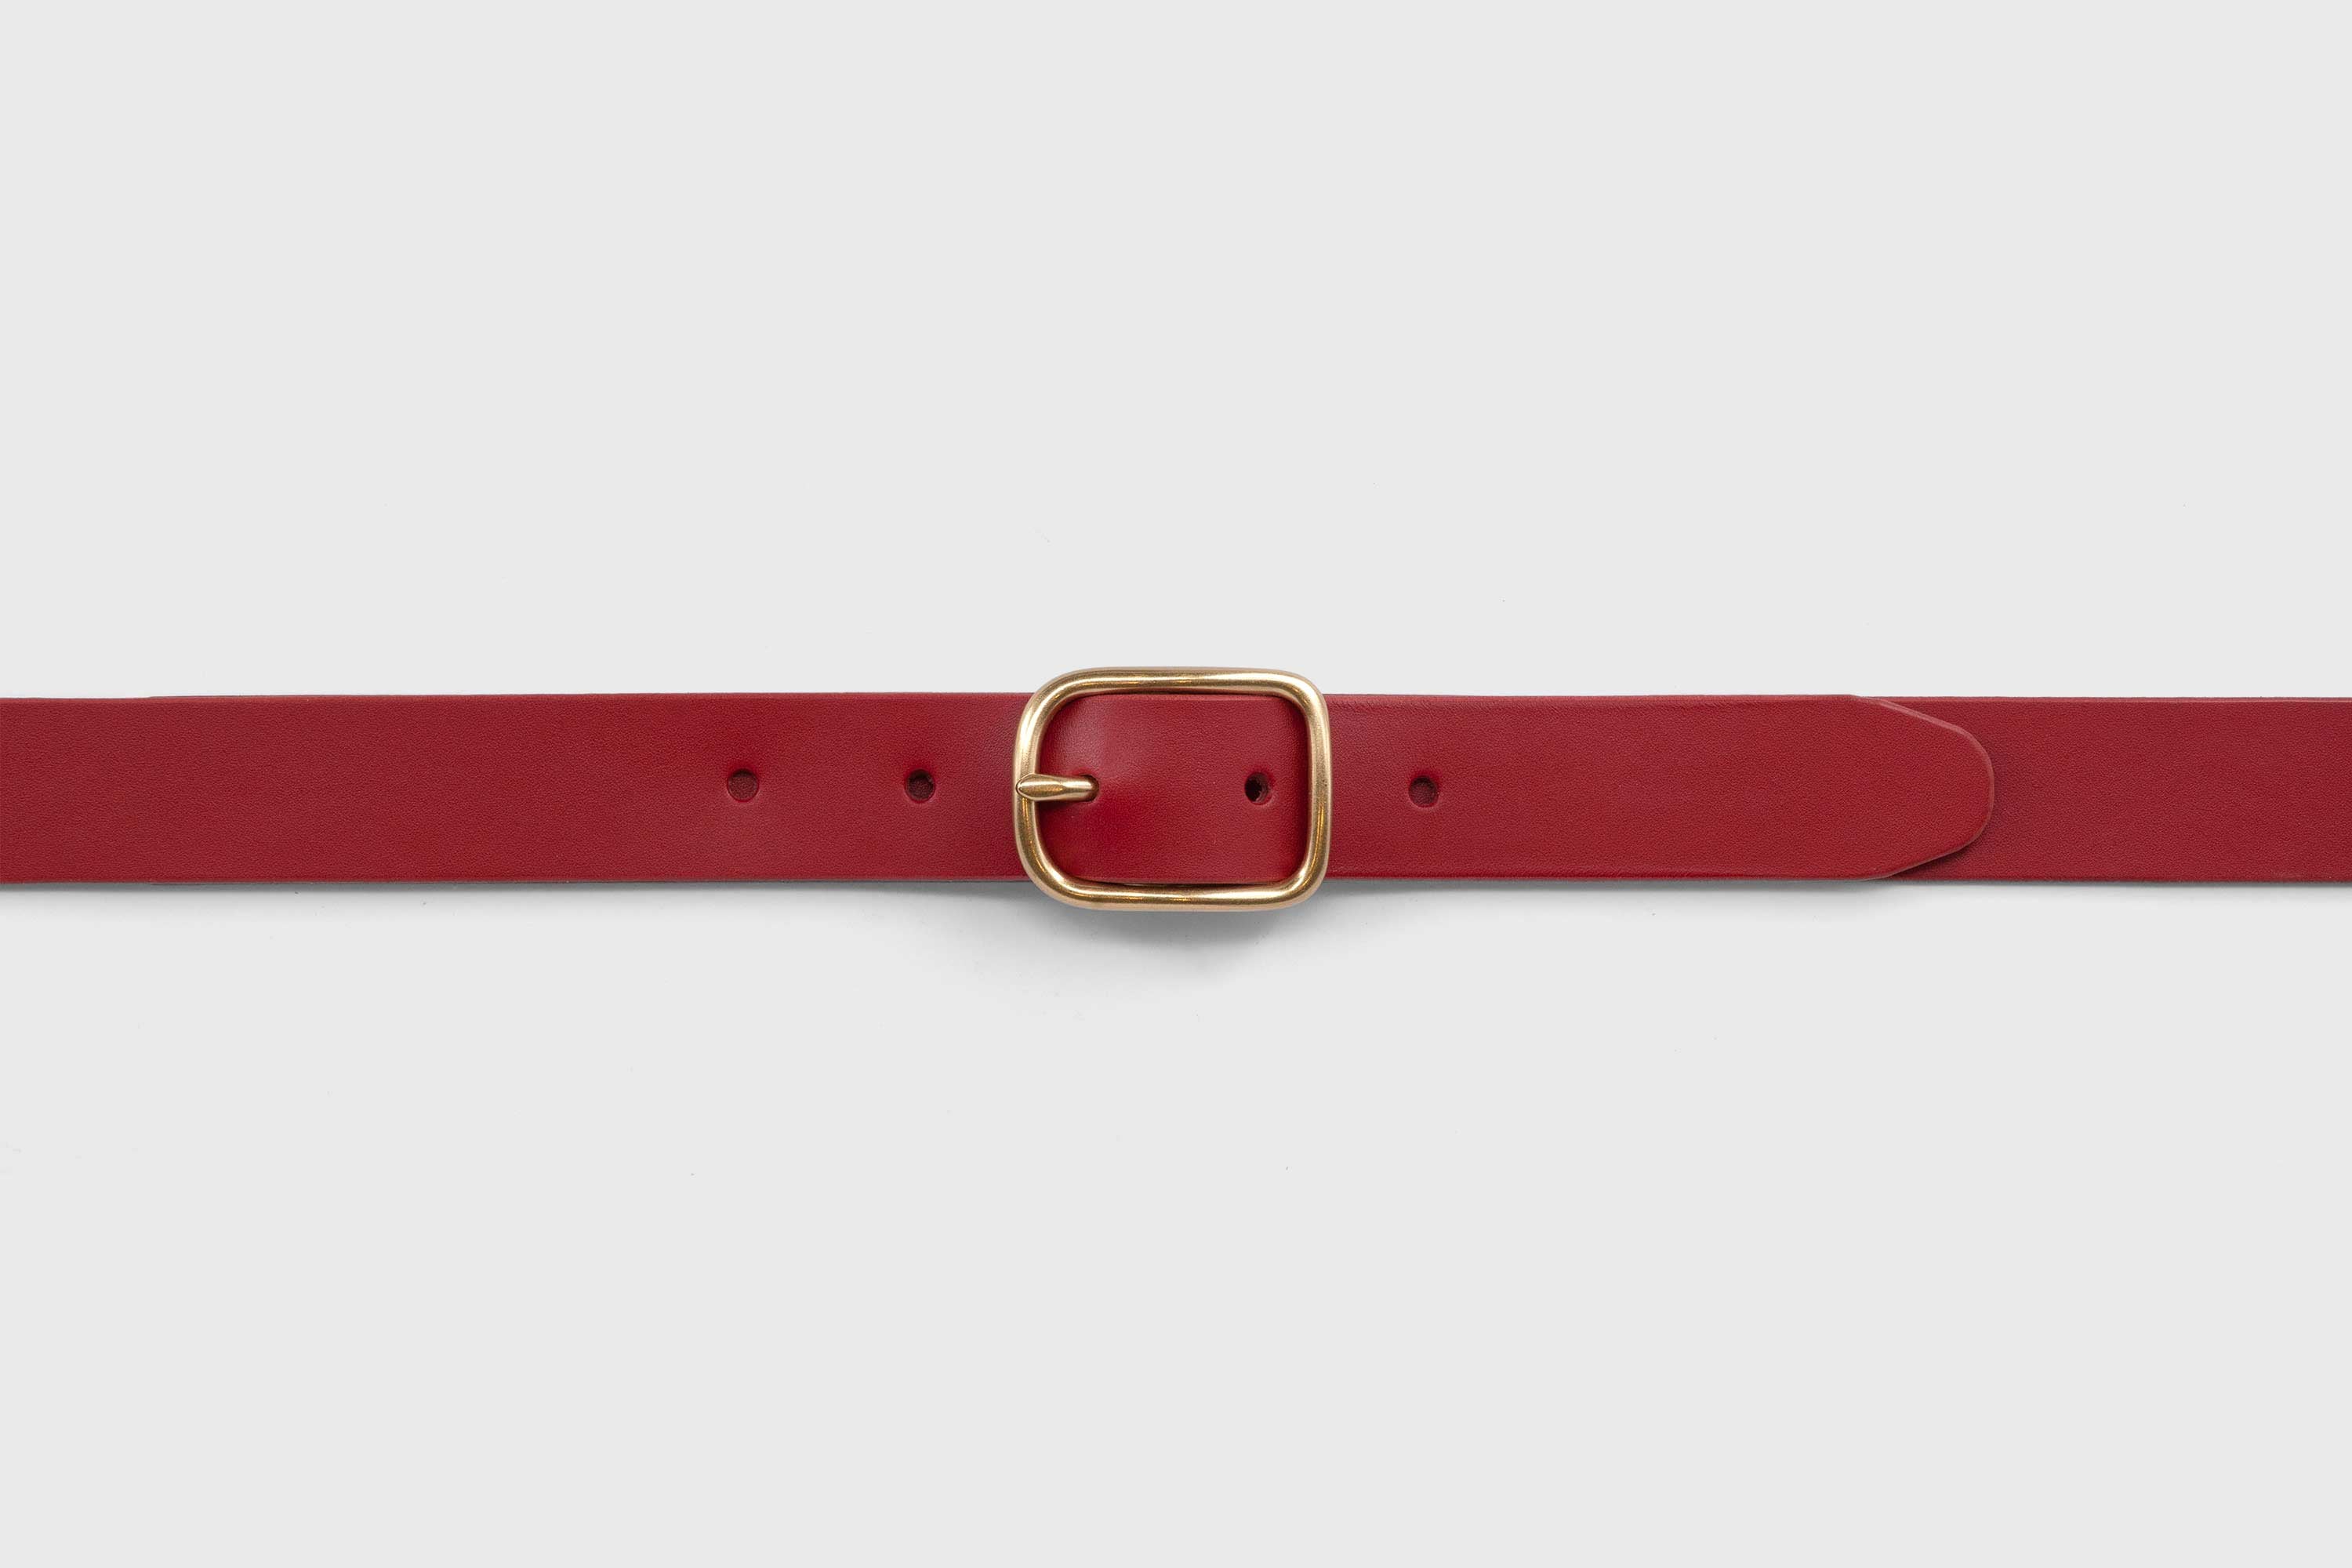 Leather Belt Small Rio Solid Brass Buckle Red vegetable tanned full grain leather Minimalist Design Atelier Madre Manuel Dreesmann Barcelona